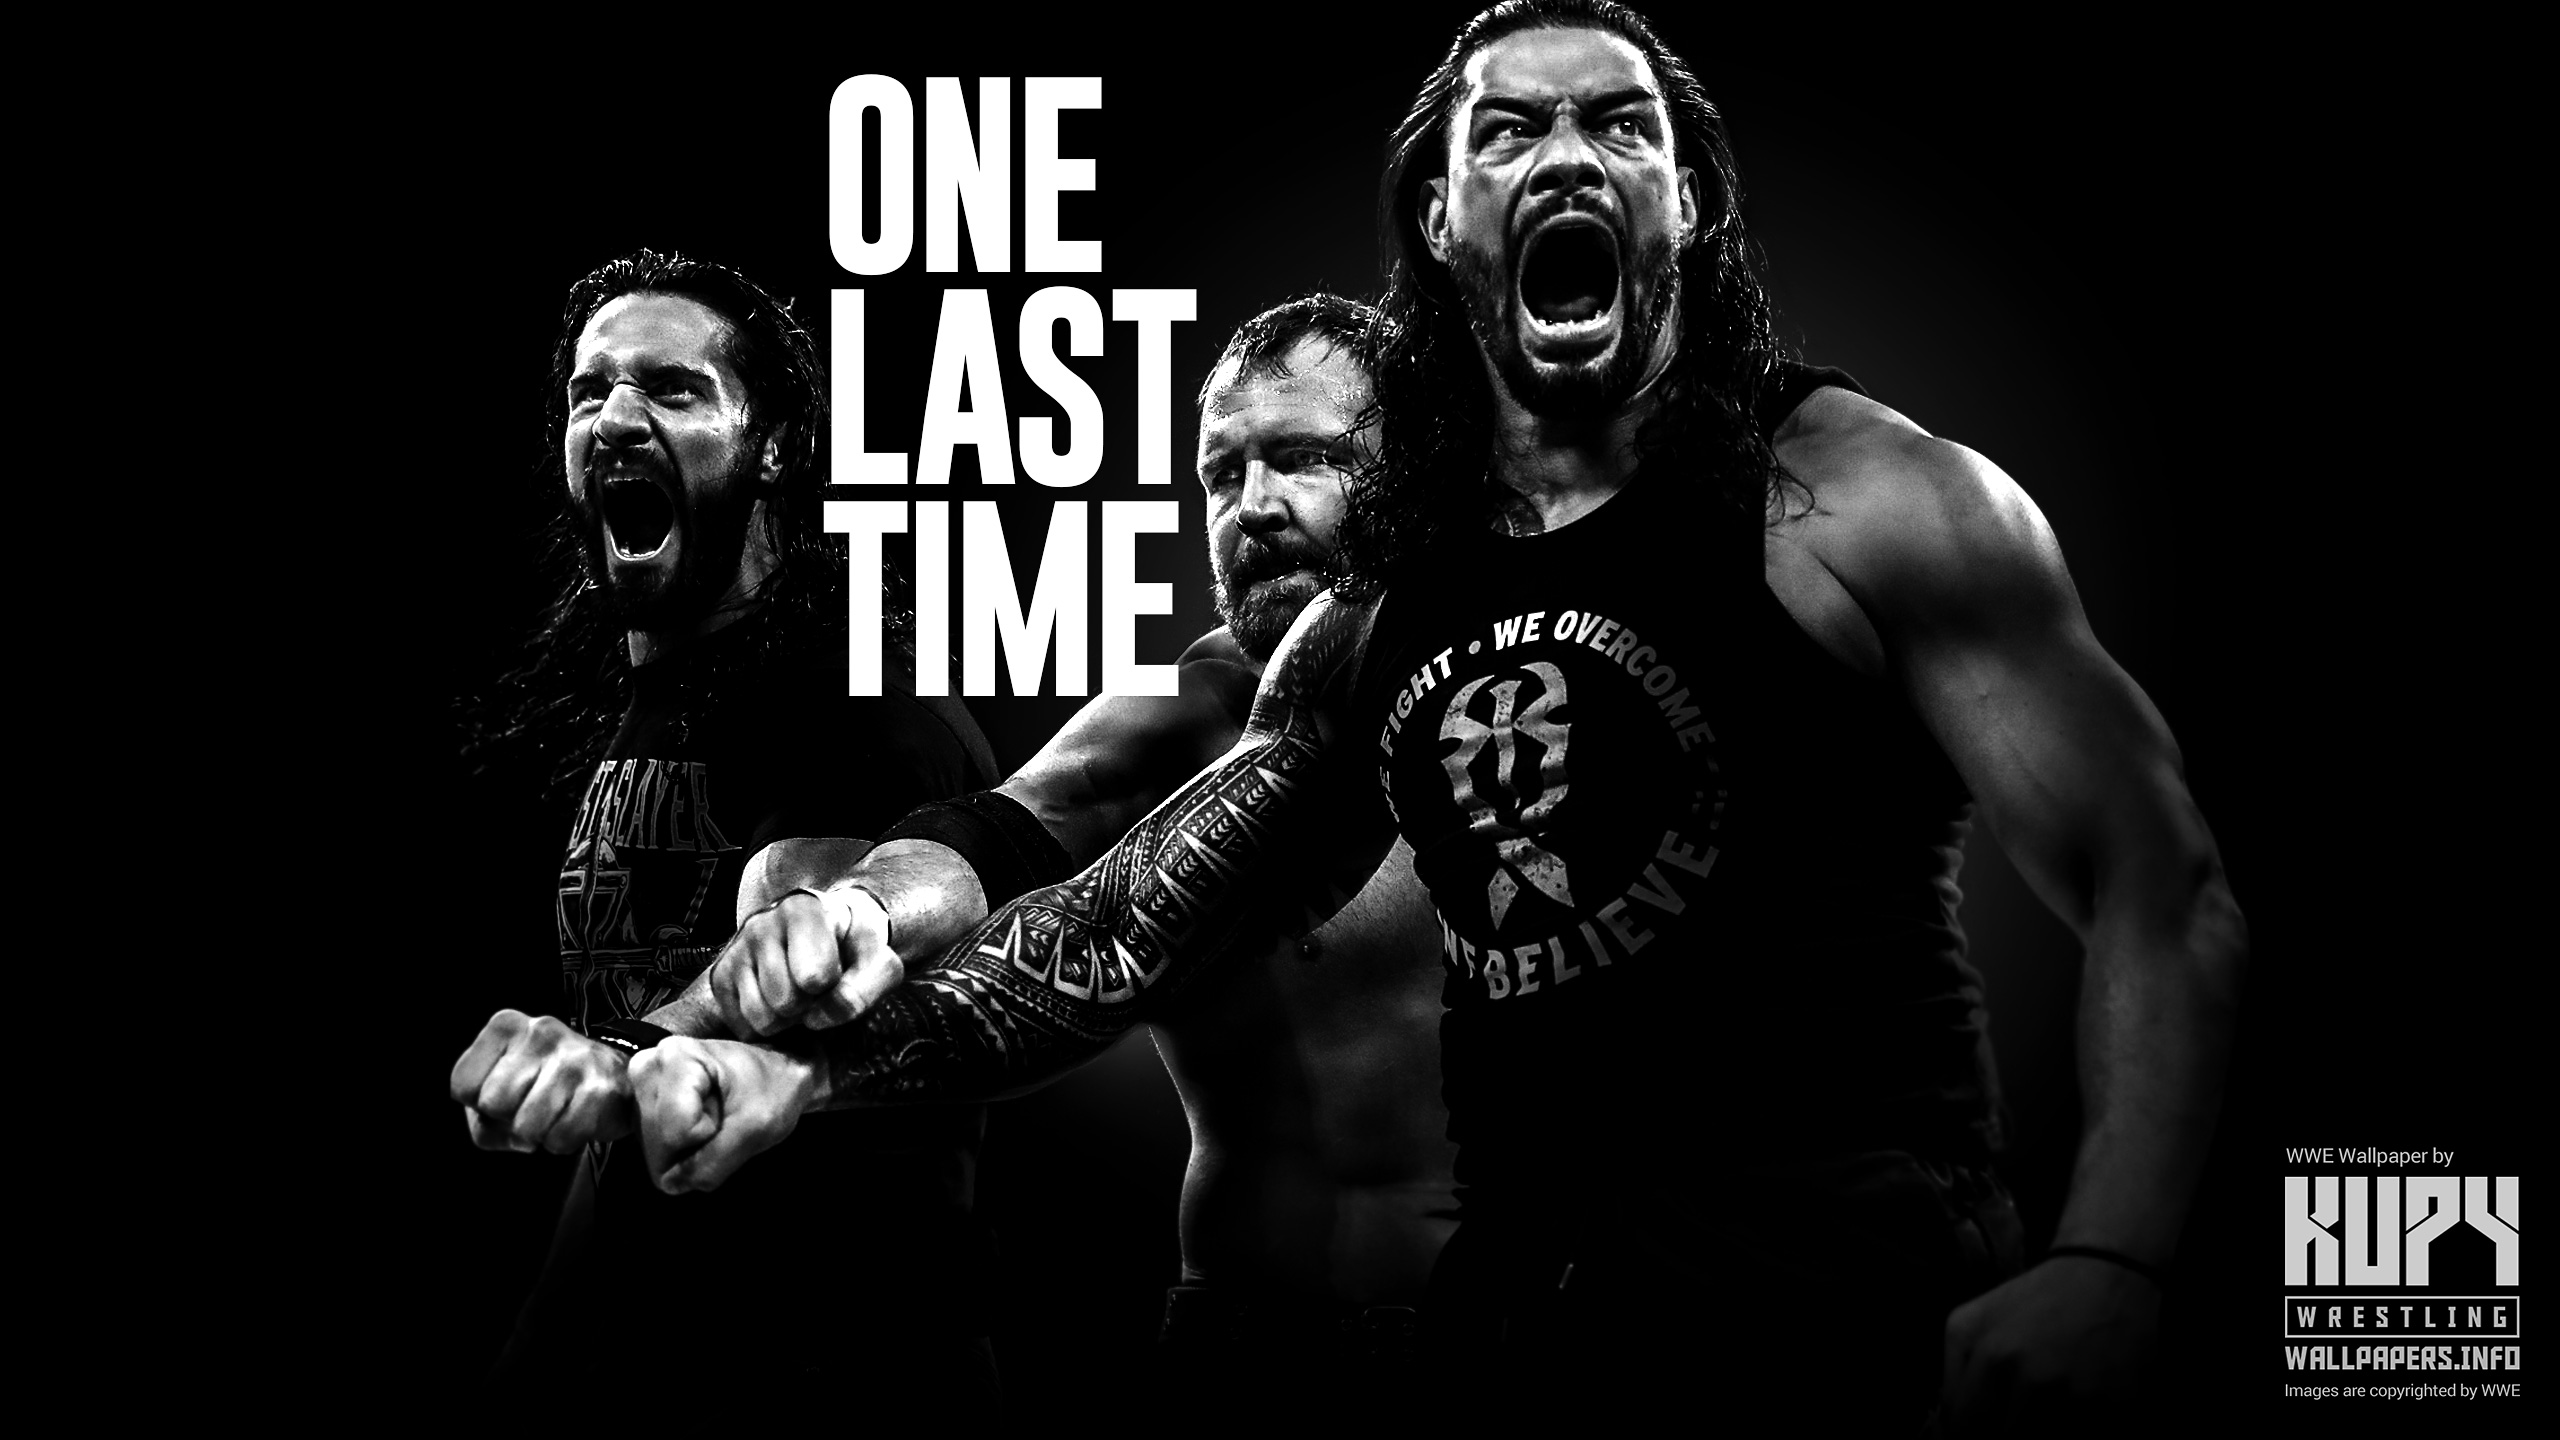 One Last Time: The Shield wallpaper - Kupy Wrestling Wallpapers